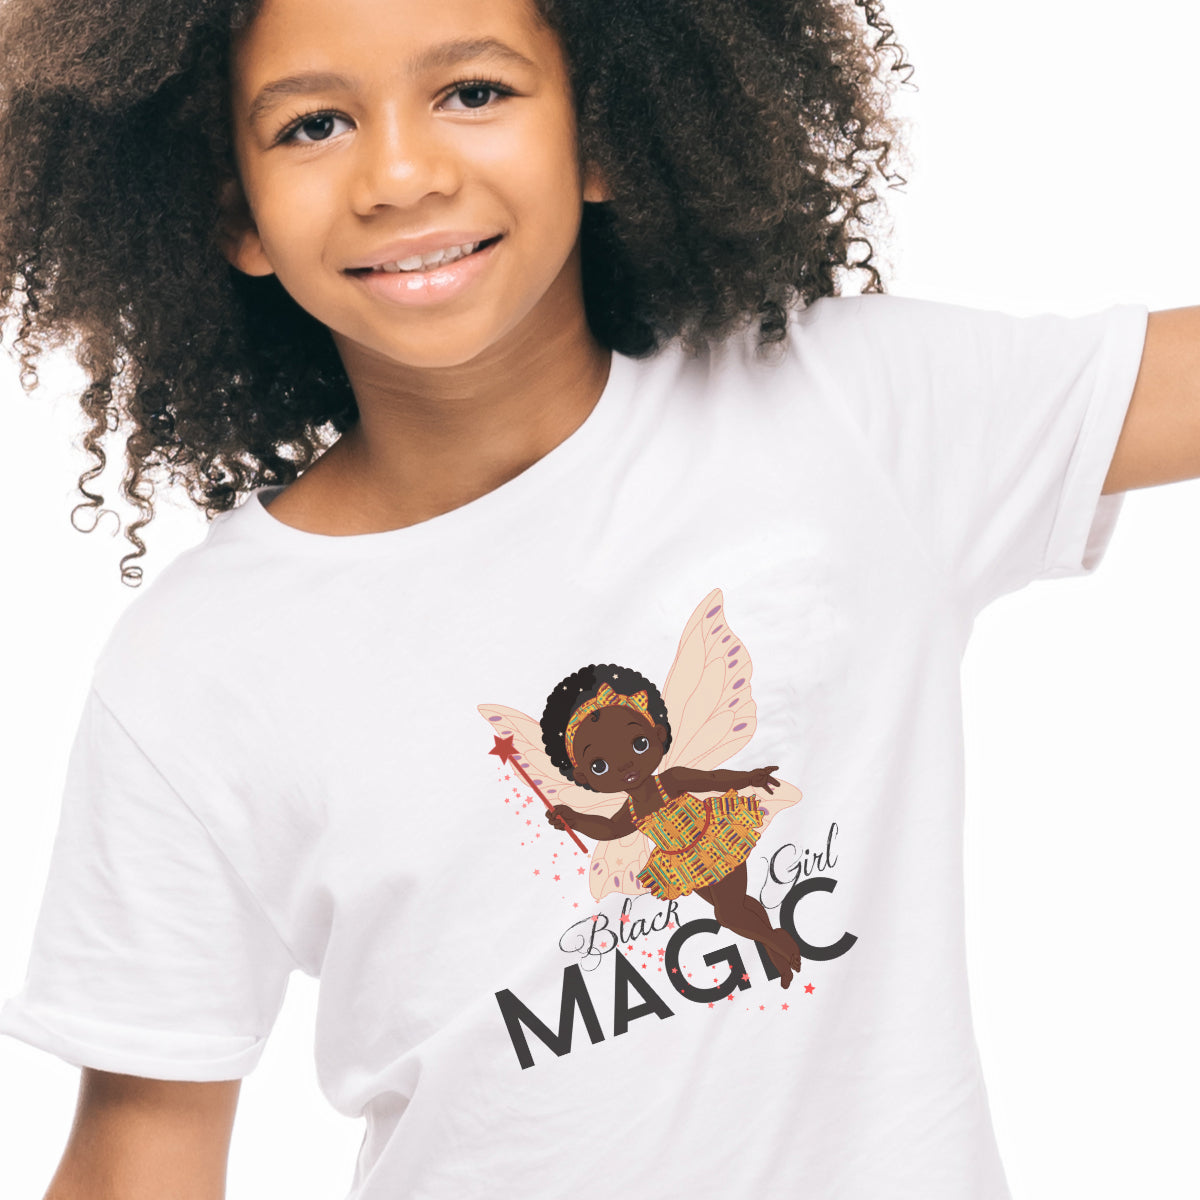 Black Girl Magic Tshirt - Ages 6 and Over